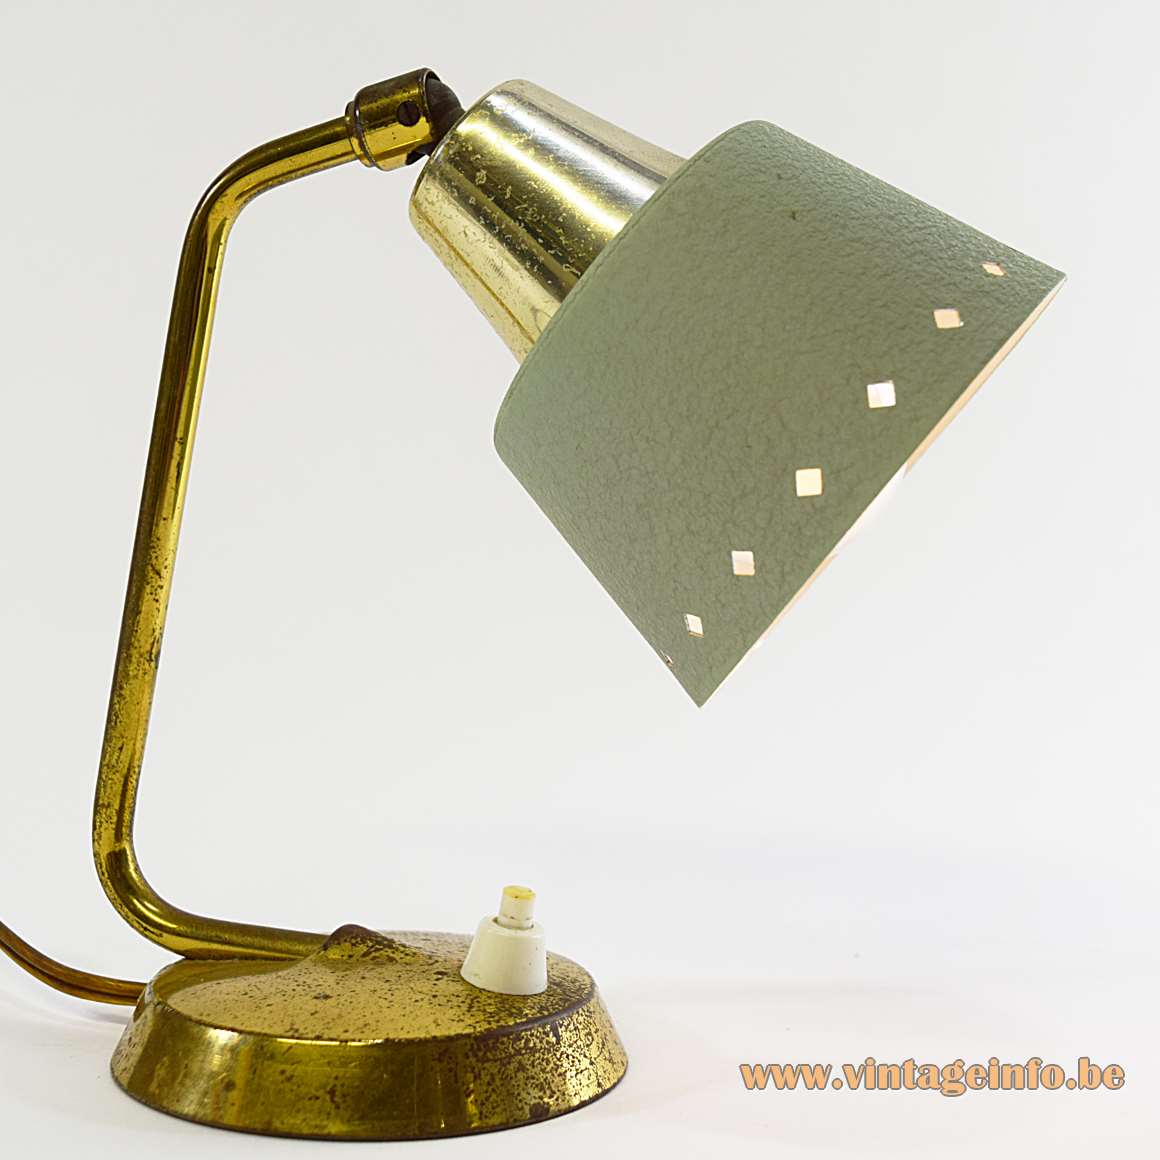 1950s perforated bedside lamp brass base & rod lampshade with diamond holes ERPEES Pfäffle Leuchten 1960s Germany